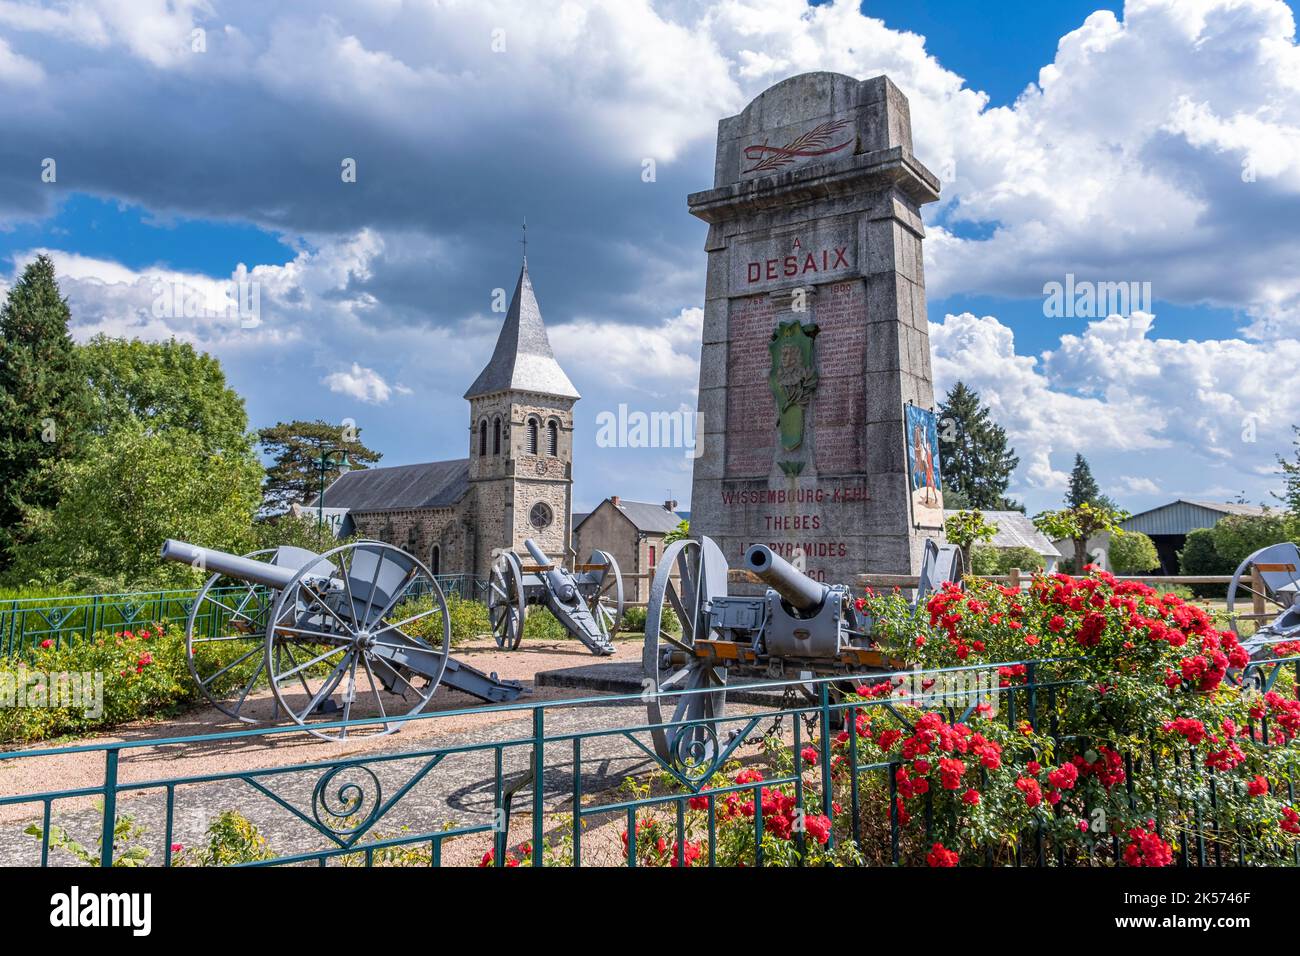 France, Puy de Dome, Ayat sur Sioule, Saint-Hilaire church and stele to General Desaix, a native of the village, recalling his military campaigns Stock Photo